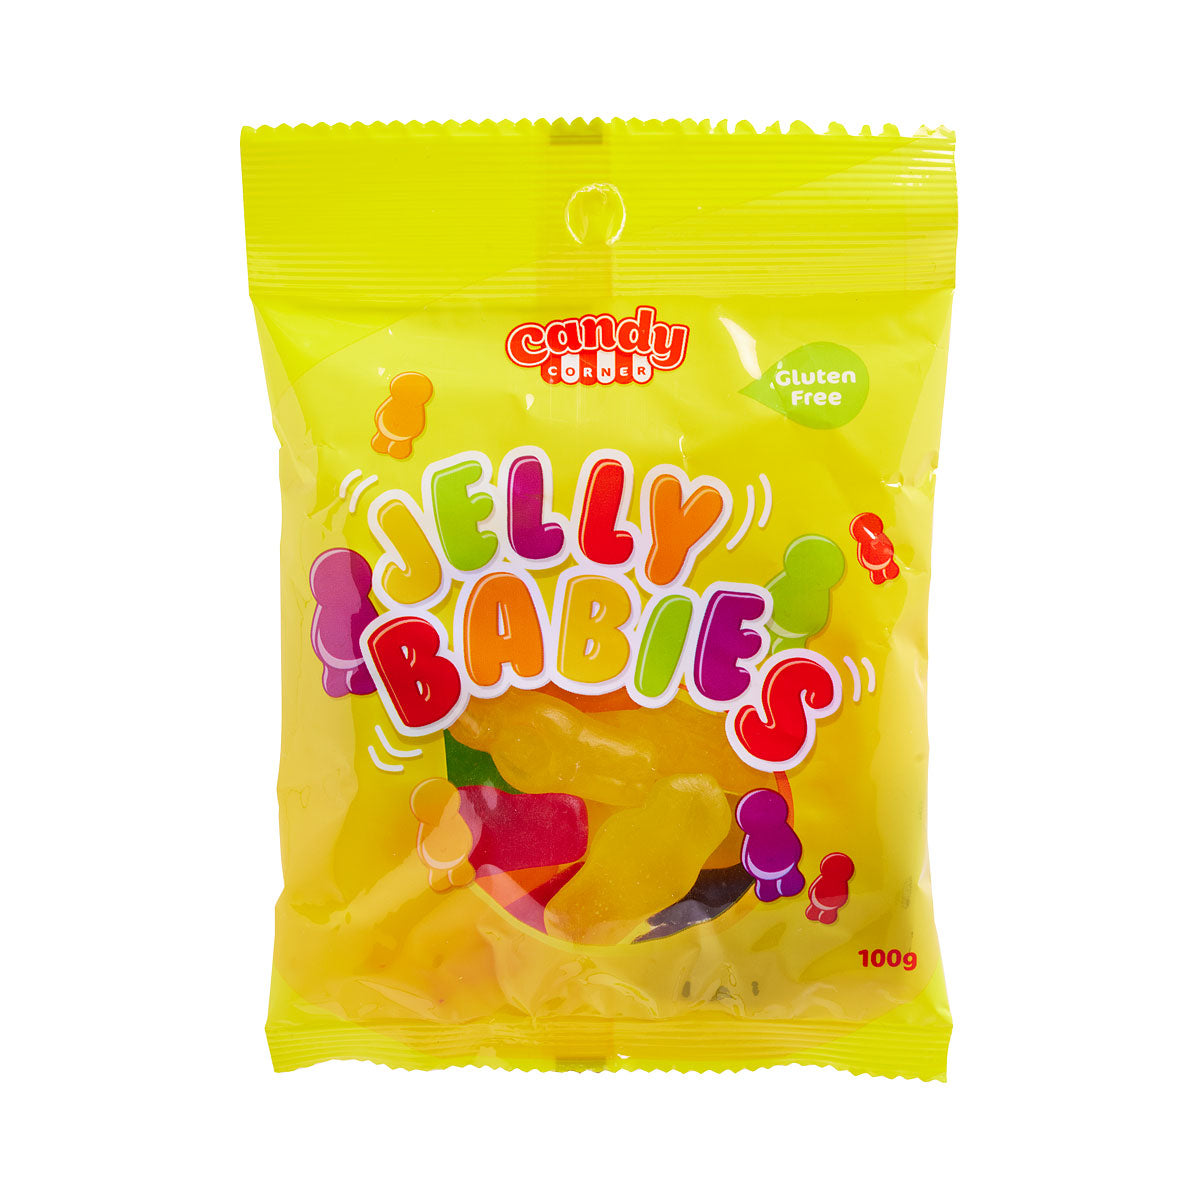 Candy Corner Jelly Babies 100g | The Reject Shop